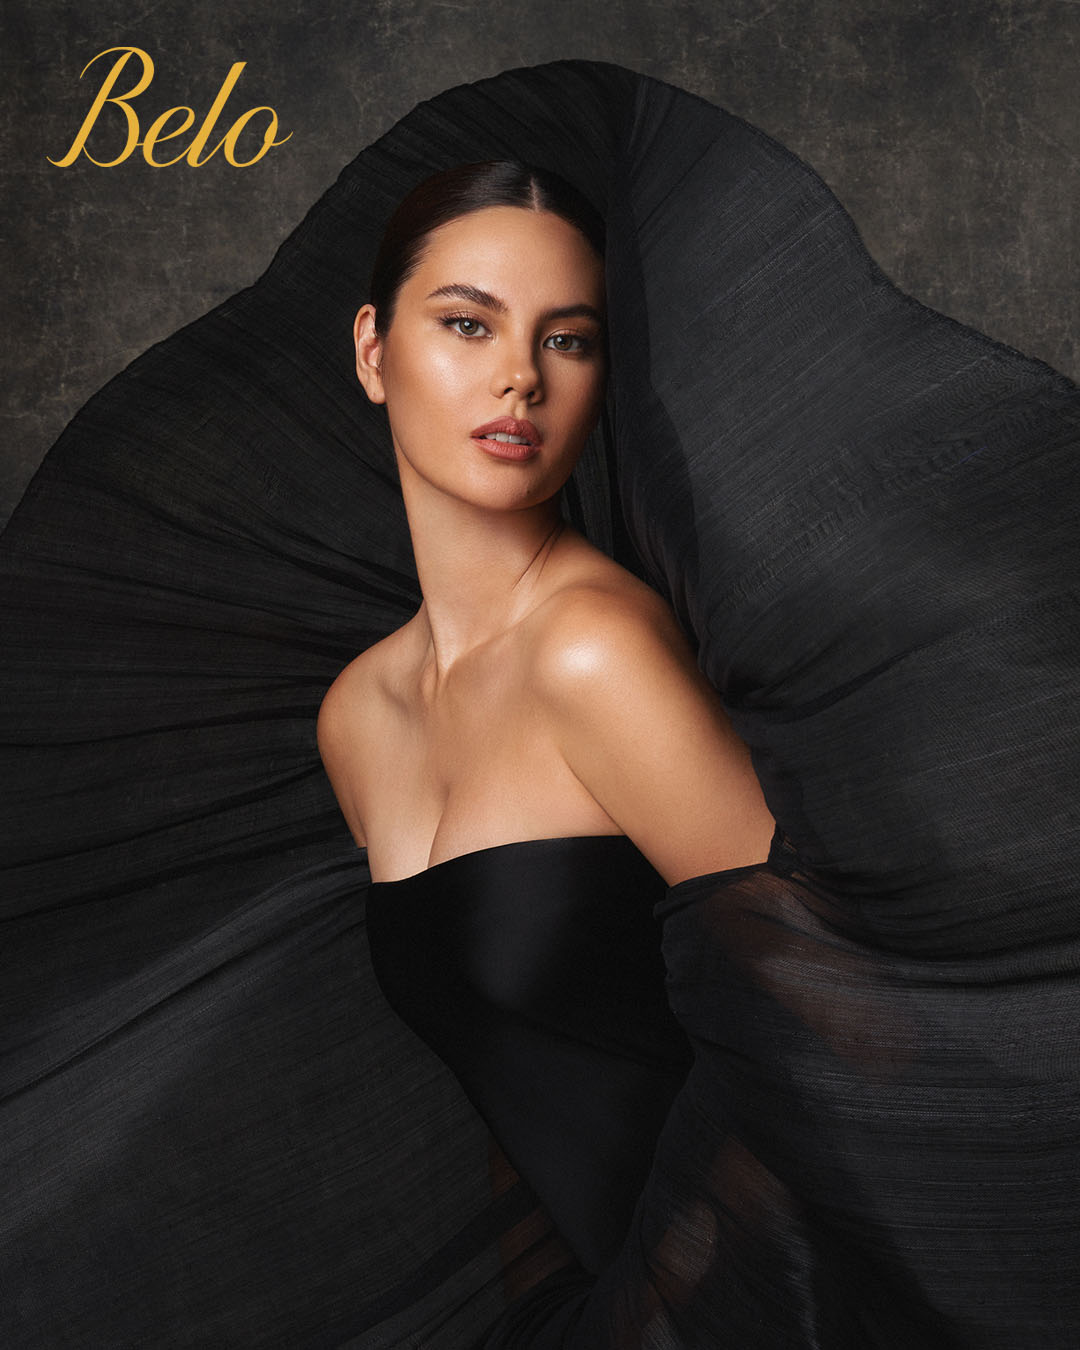 Ageless Elegance: Catriona Gray Captivates with Belo’s Thermage FLX